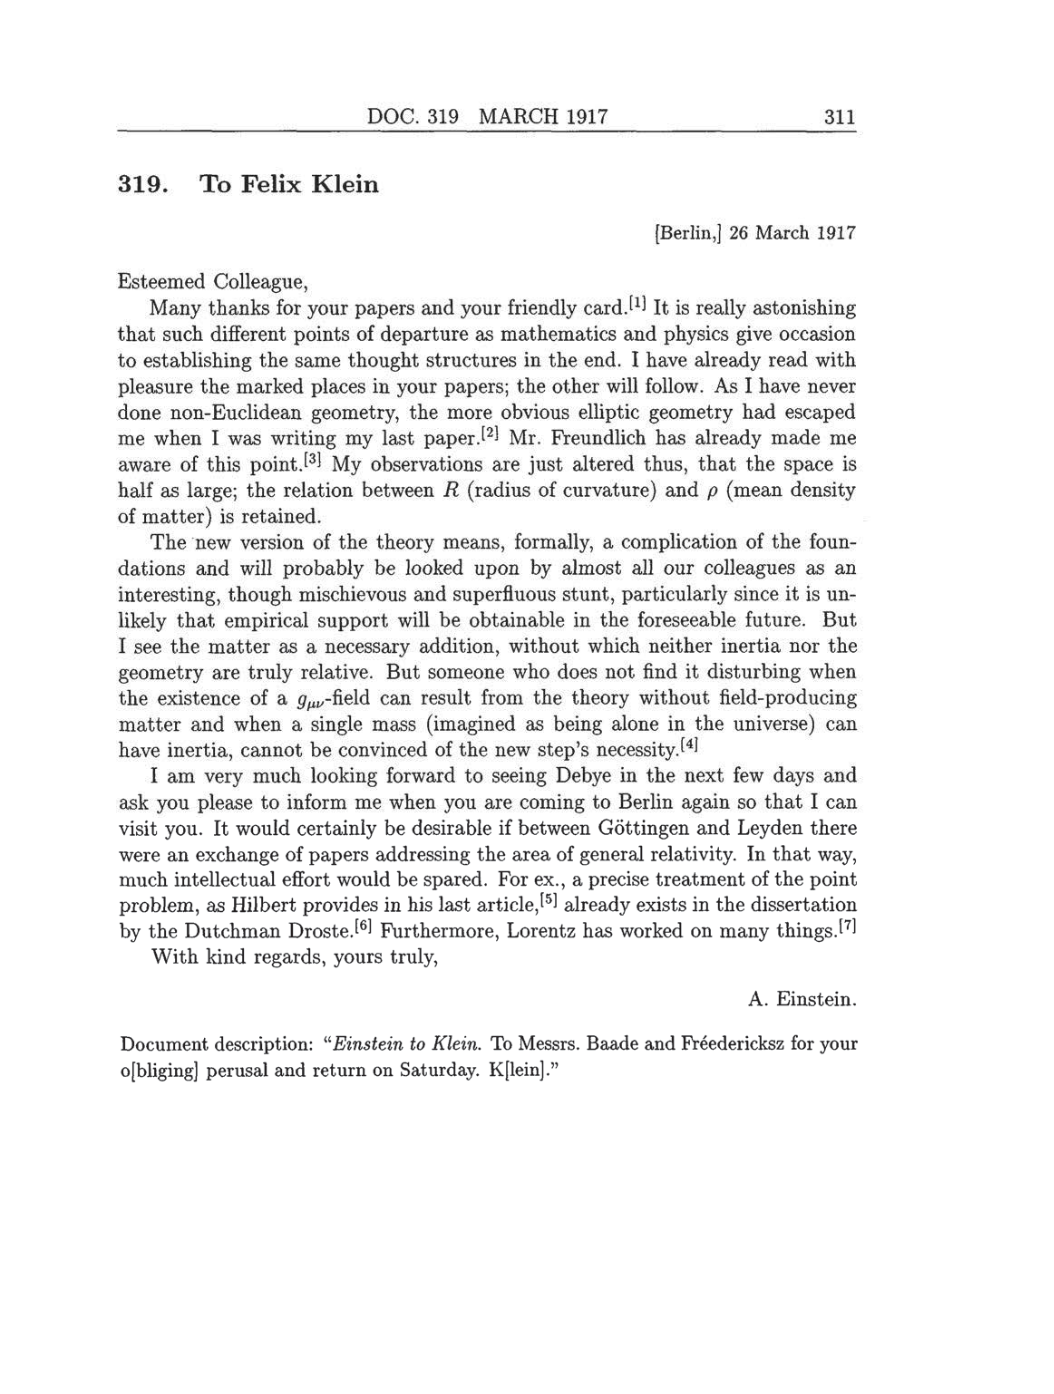 Volume 8: The Berlin Years: Correspondence, 1914-1918 (English translation supplement) page 311